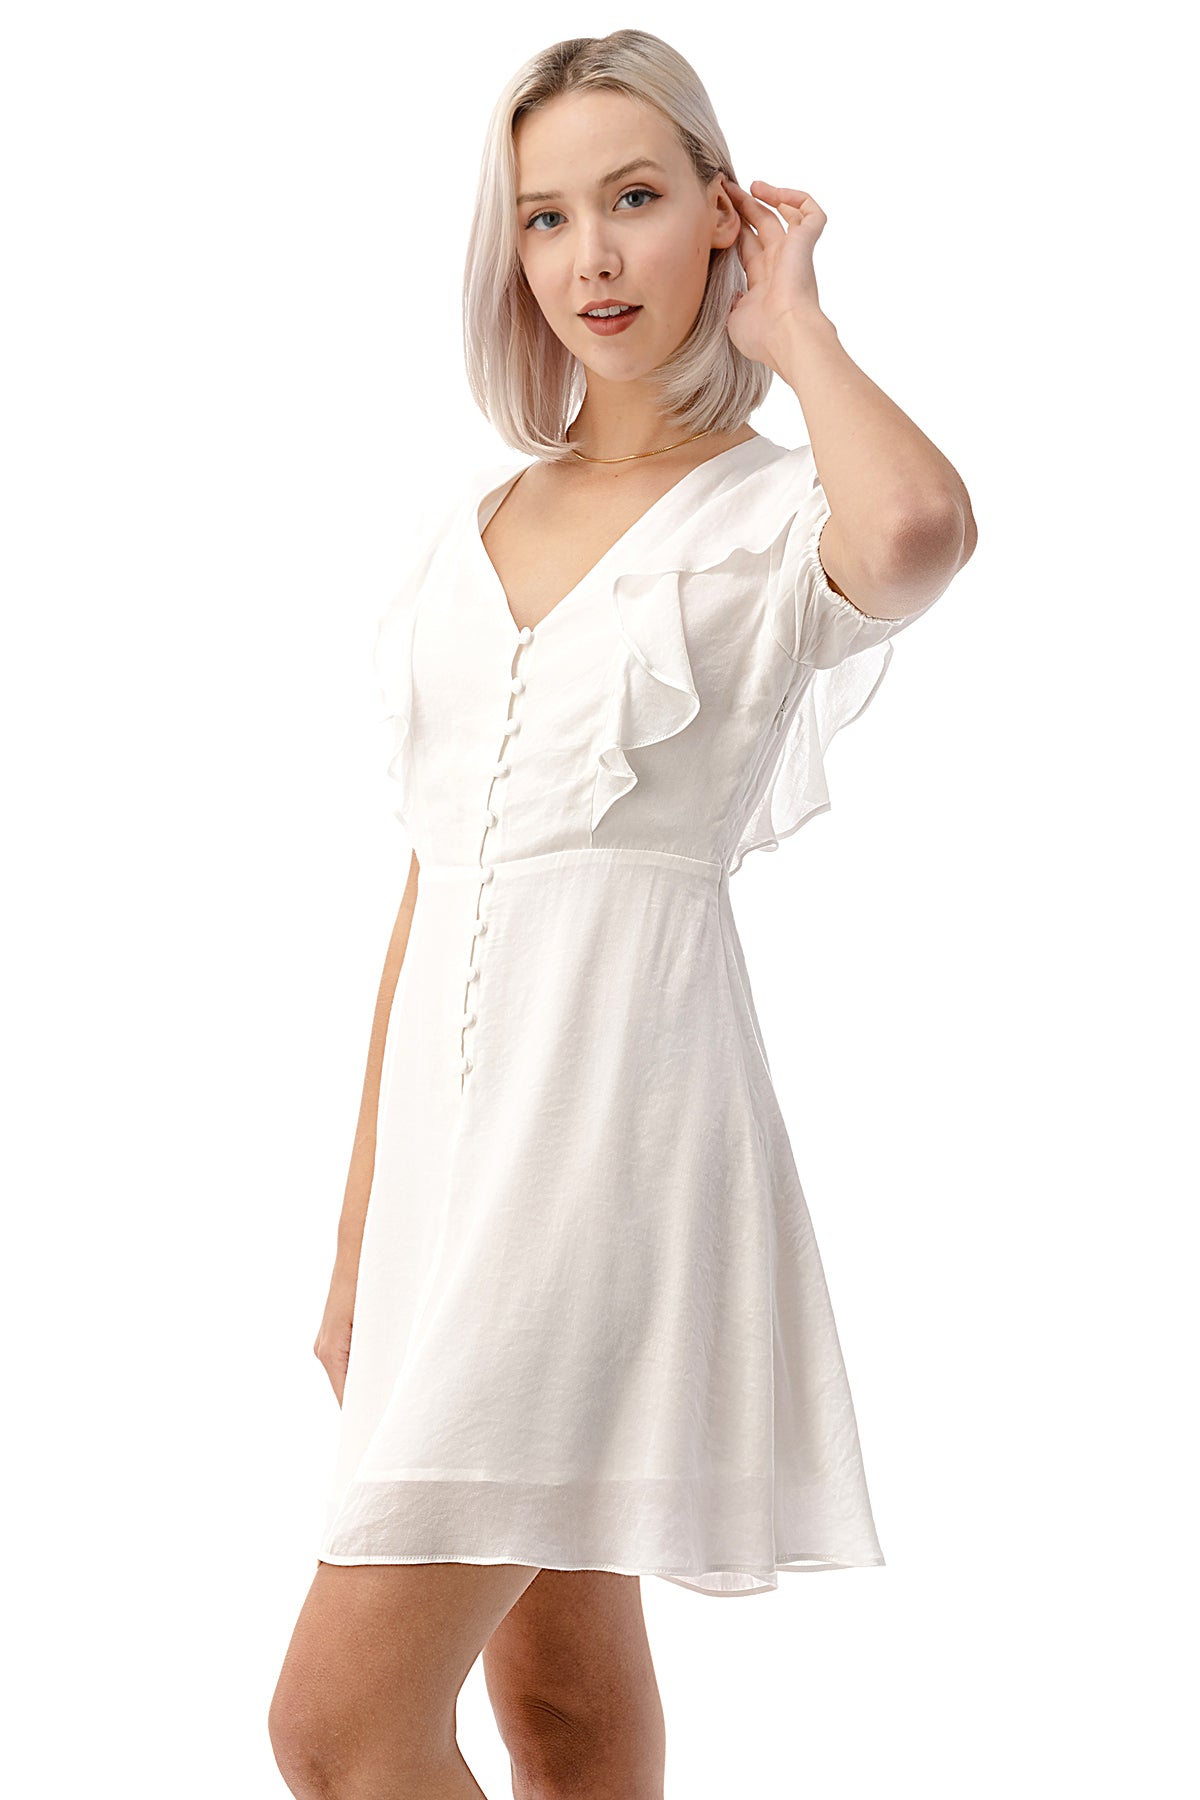 Button Down V-Neck Short EDGY – Party A-Line Ruffled Land Above-Knee Dress Sleeve